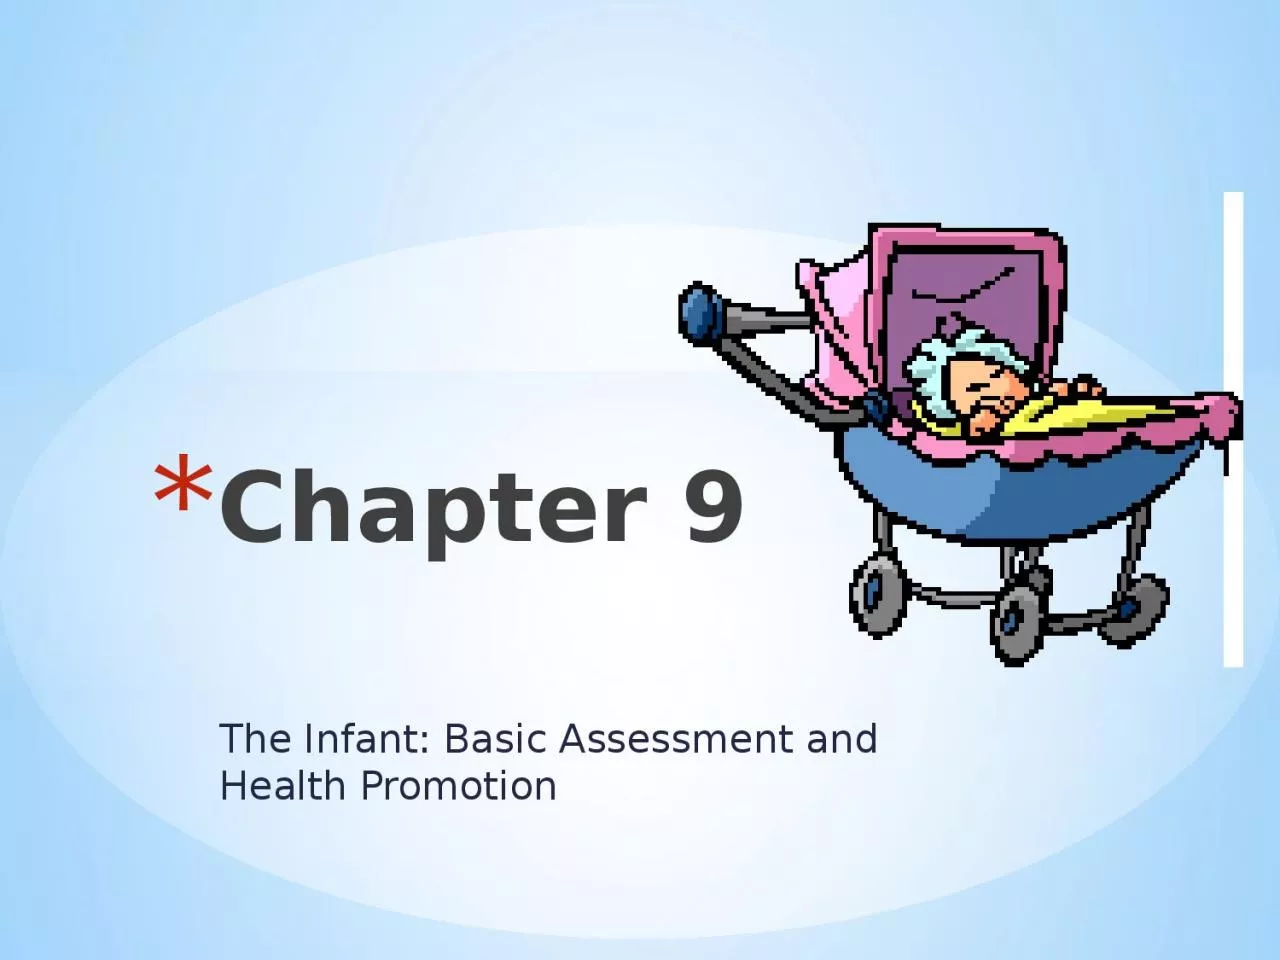 The Infant: Basic Assessment and Health Promotion